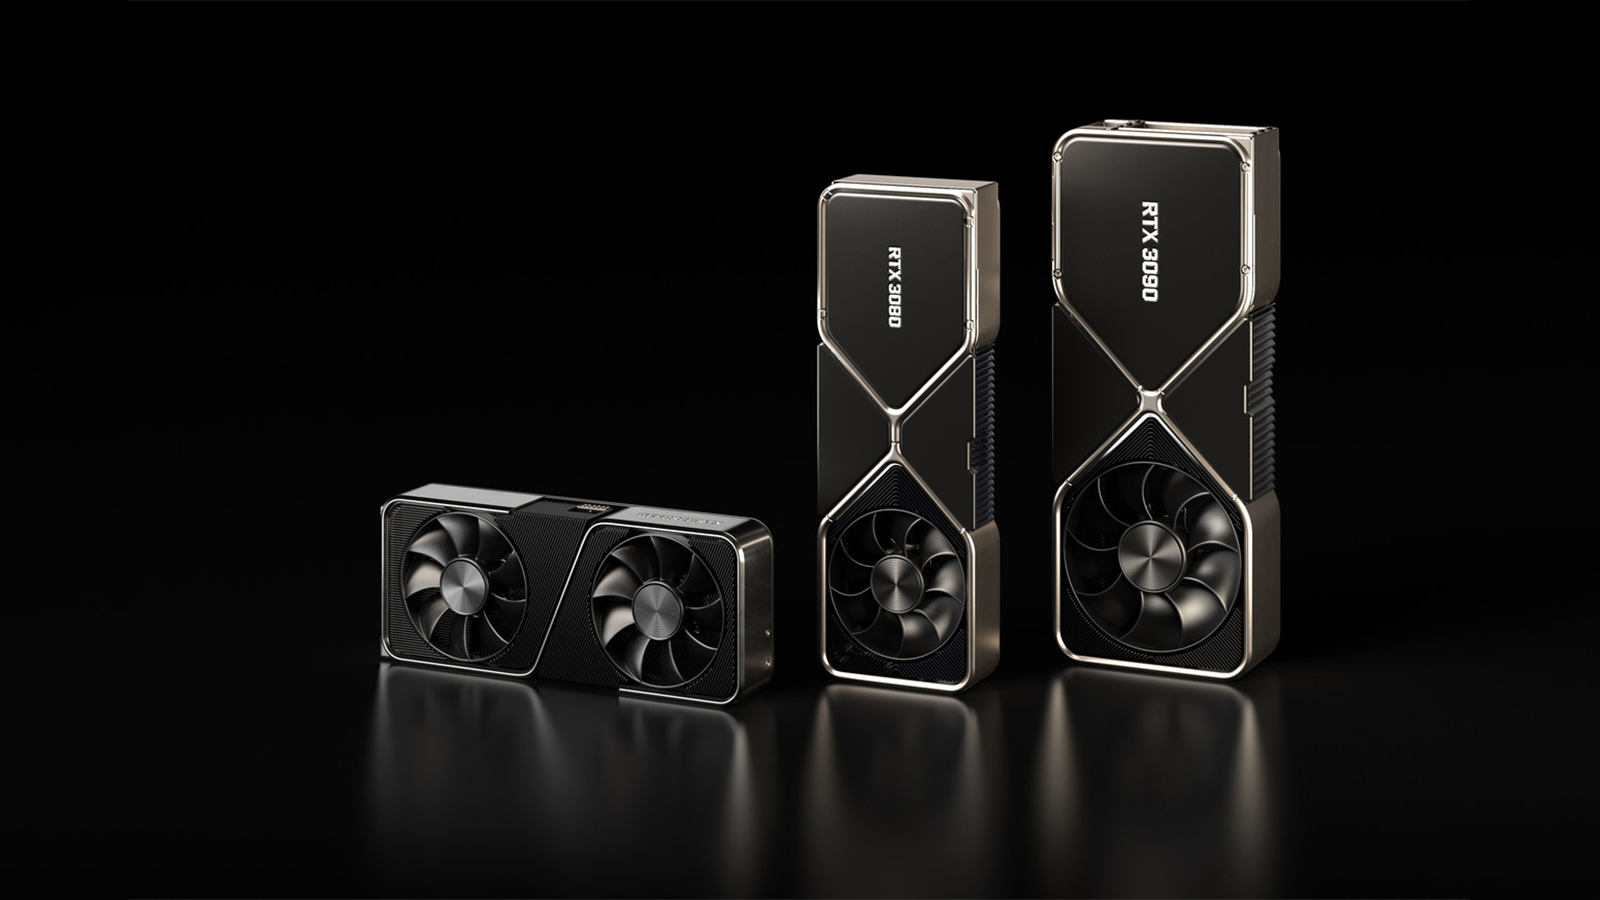 Nvidia RTX 3070, RTX 3080, And RTX 3090 Lined Up In A Promotional Image From Nvidia